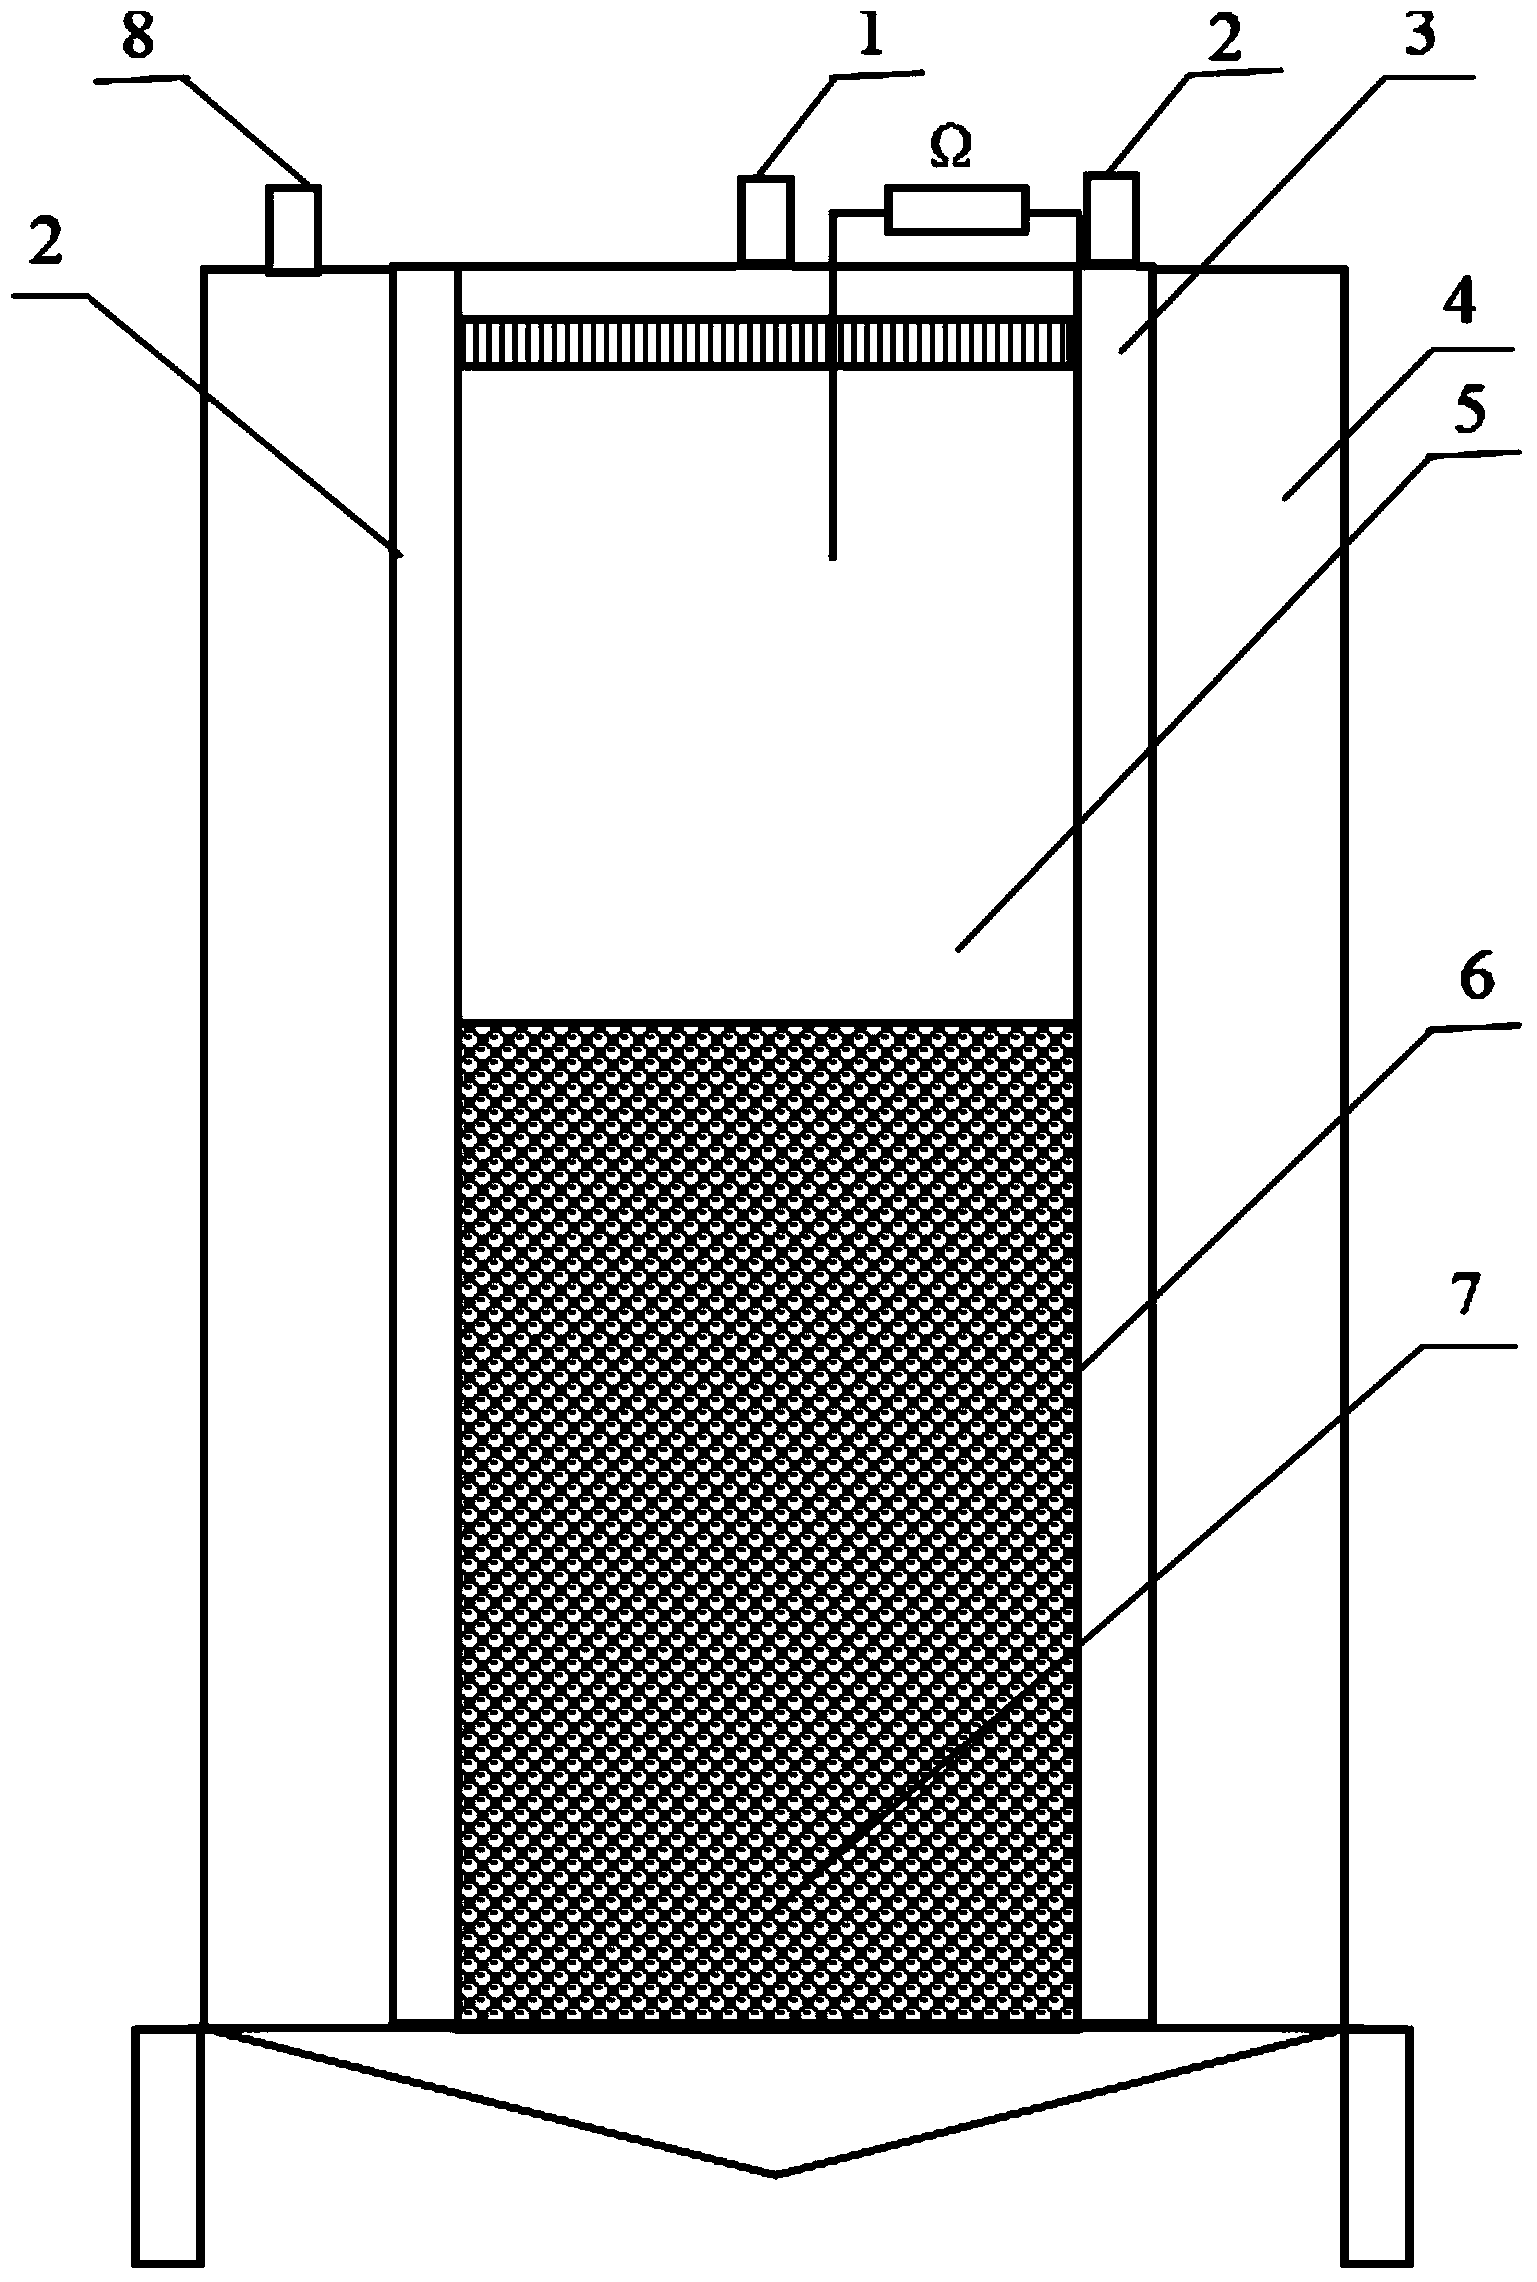 Water treating device for photosynthetic biological coupling bioelectrochemical membrane bioreactor